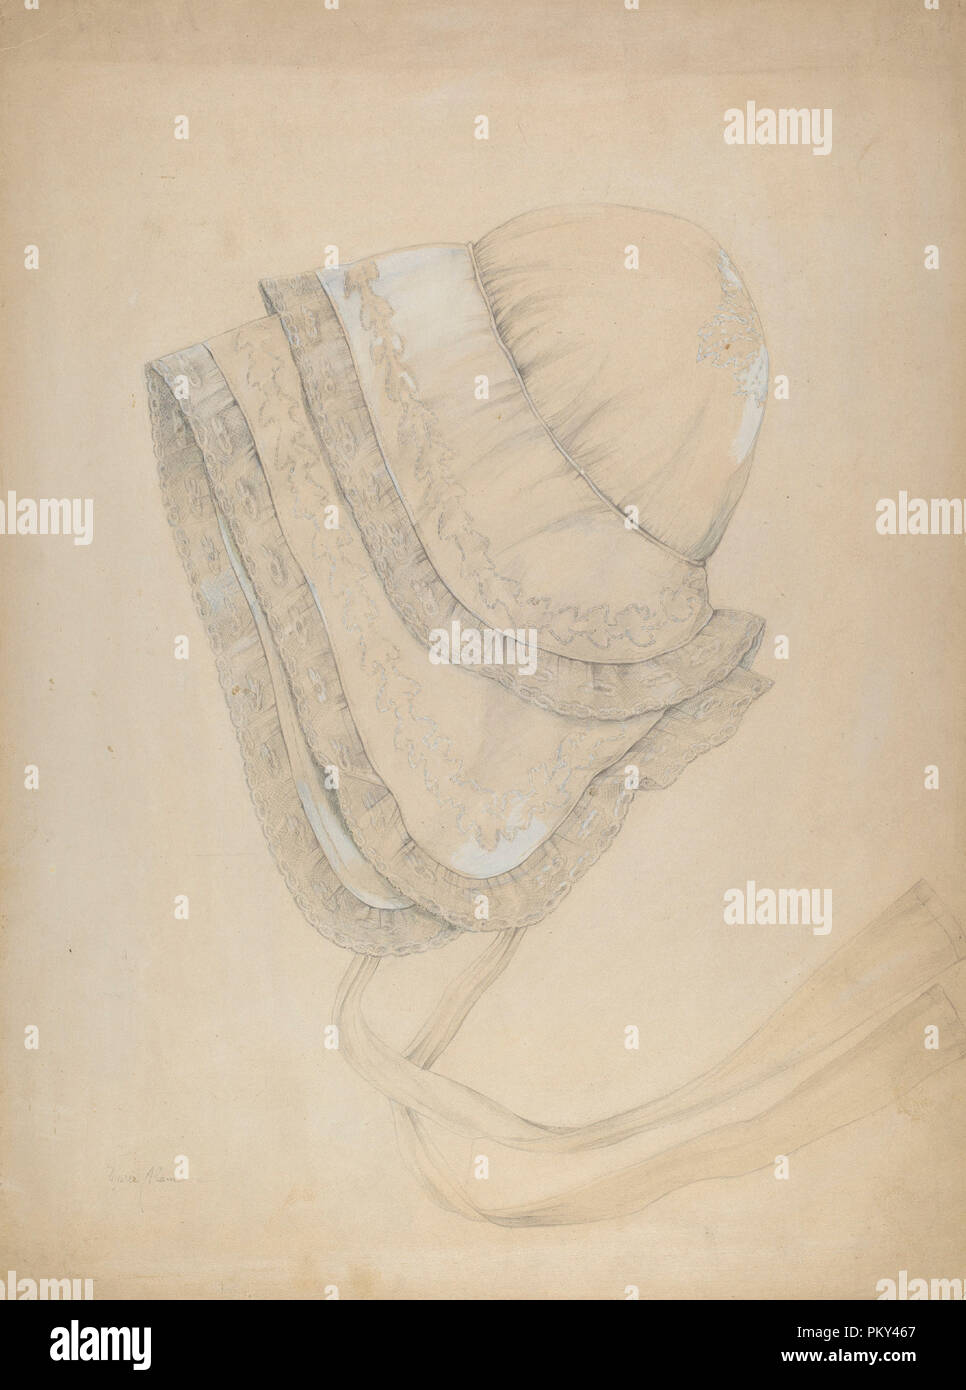 Nightcap. Dated: c. 1937. Dimensions: overall: 51.2 x 27.9 cm (20 3/16 x 11 in.). Medium: graphite and gouache on paperboard. Museum: National Gallery of Art, Washington DC. Author: Marie Alain. Stock Photo